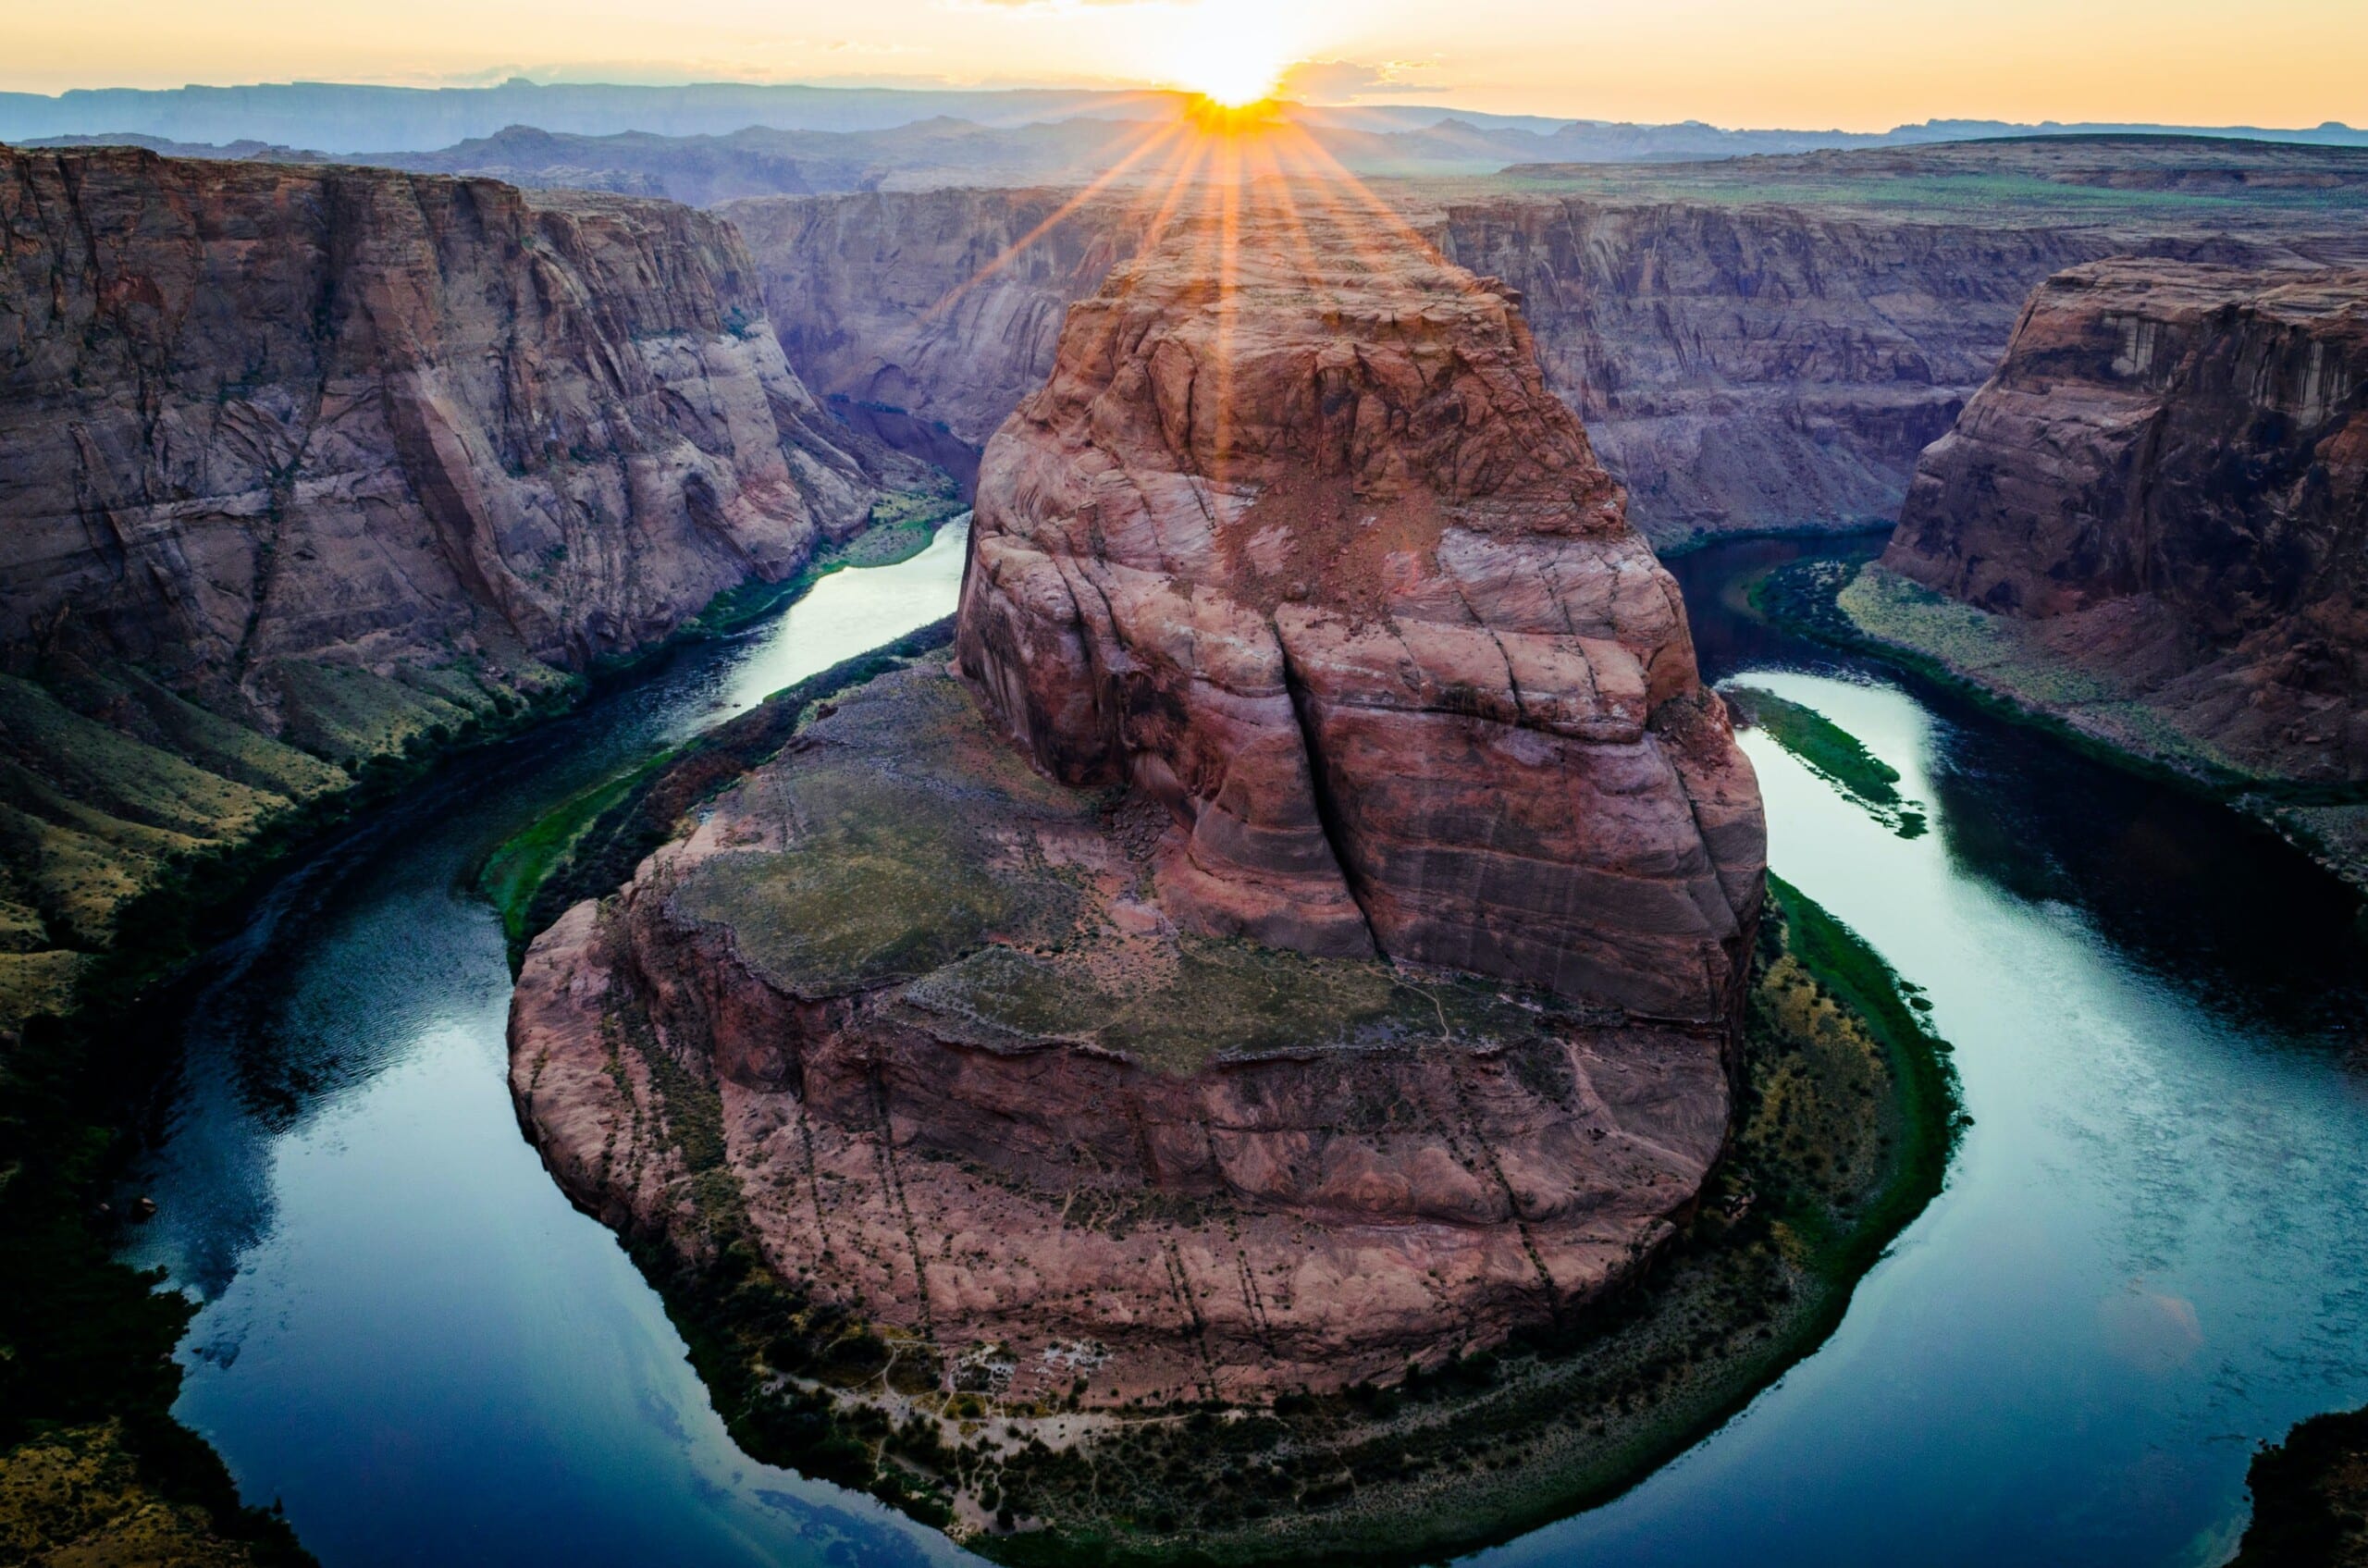 Sunset view at Horseshoe Bend